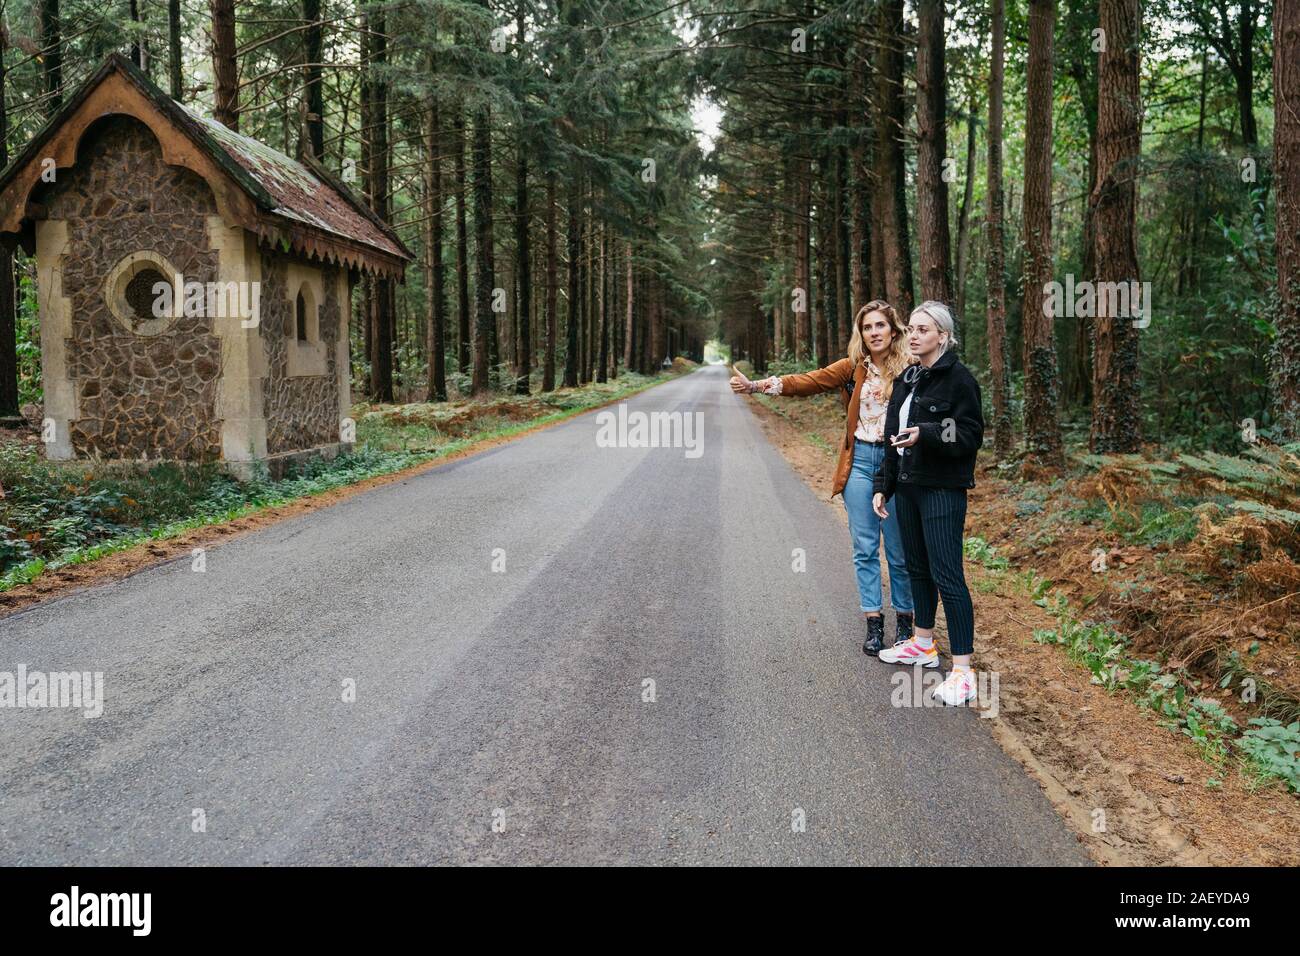 Two women hitchhiking on a forest road in France Stock Photo